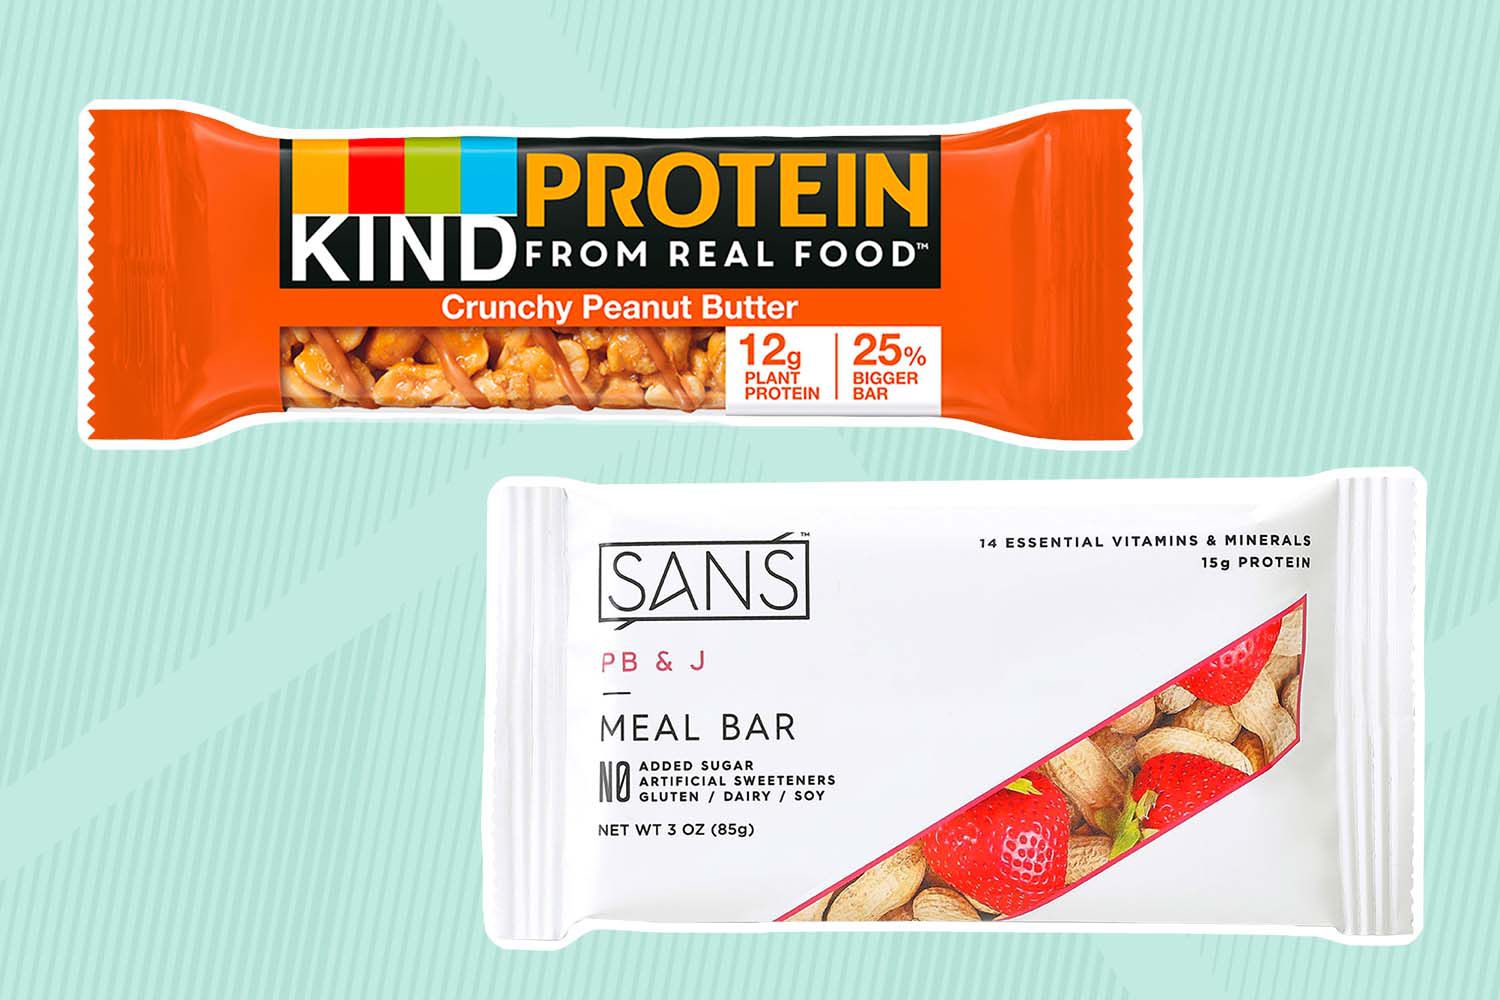 SANS Meal Replacement Protein Bar and Kind Protein Bars, Crunchy Peanut Butter collaged on a striped green background